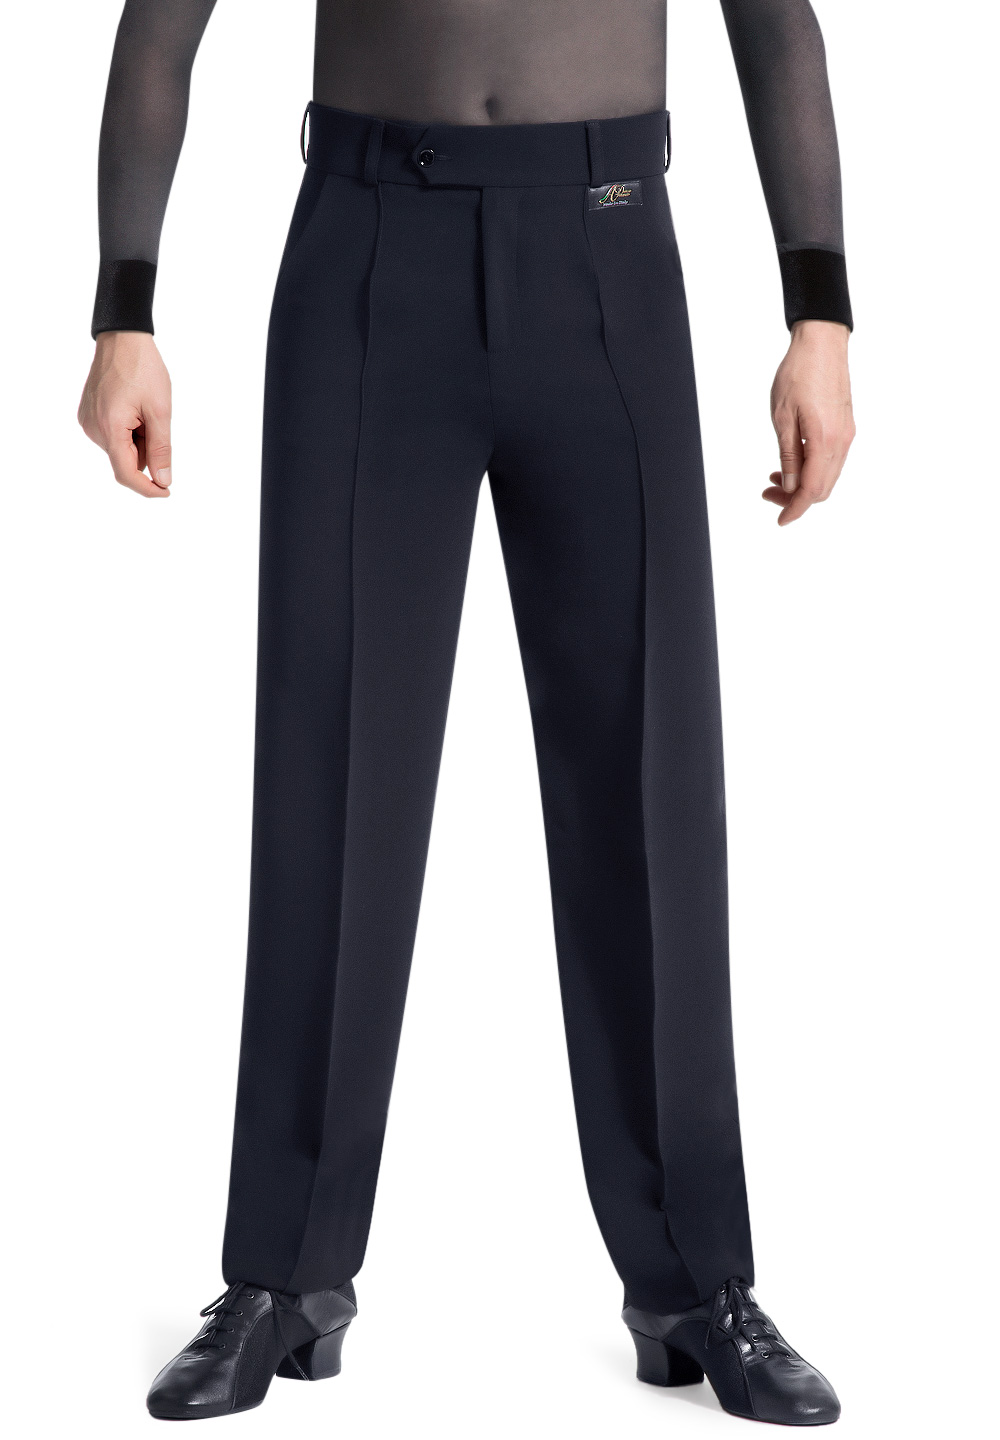 ENTRY LEVEL LATIN STRETCHY MENS DANCE COMPETITION TROUSERS BLACK 